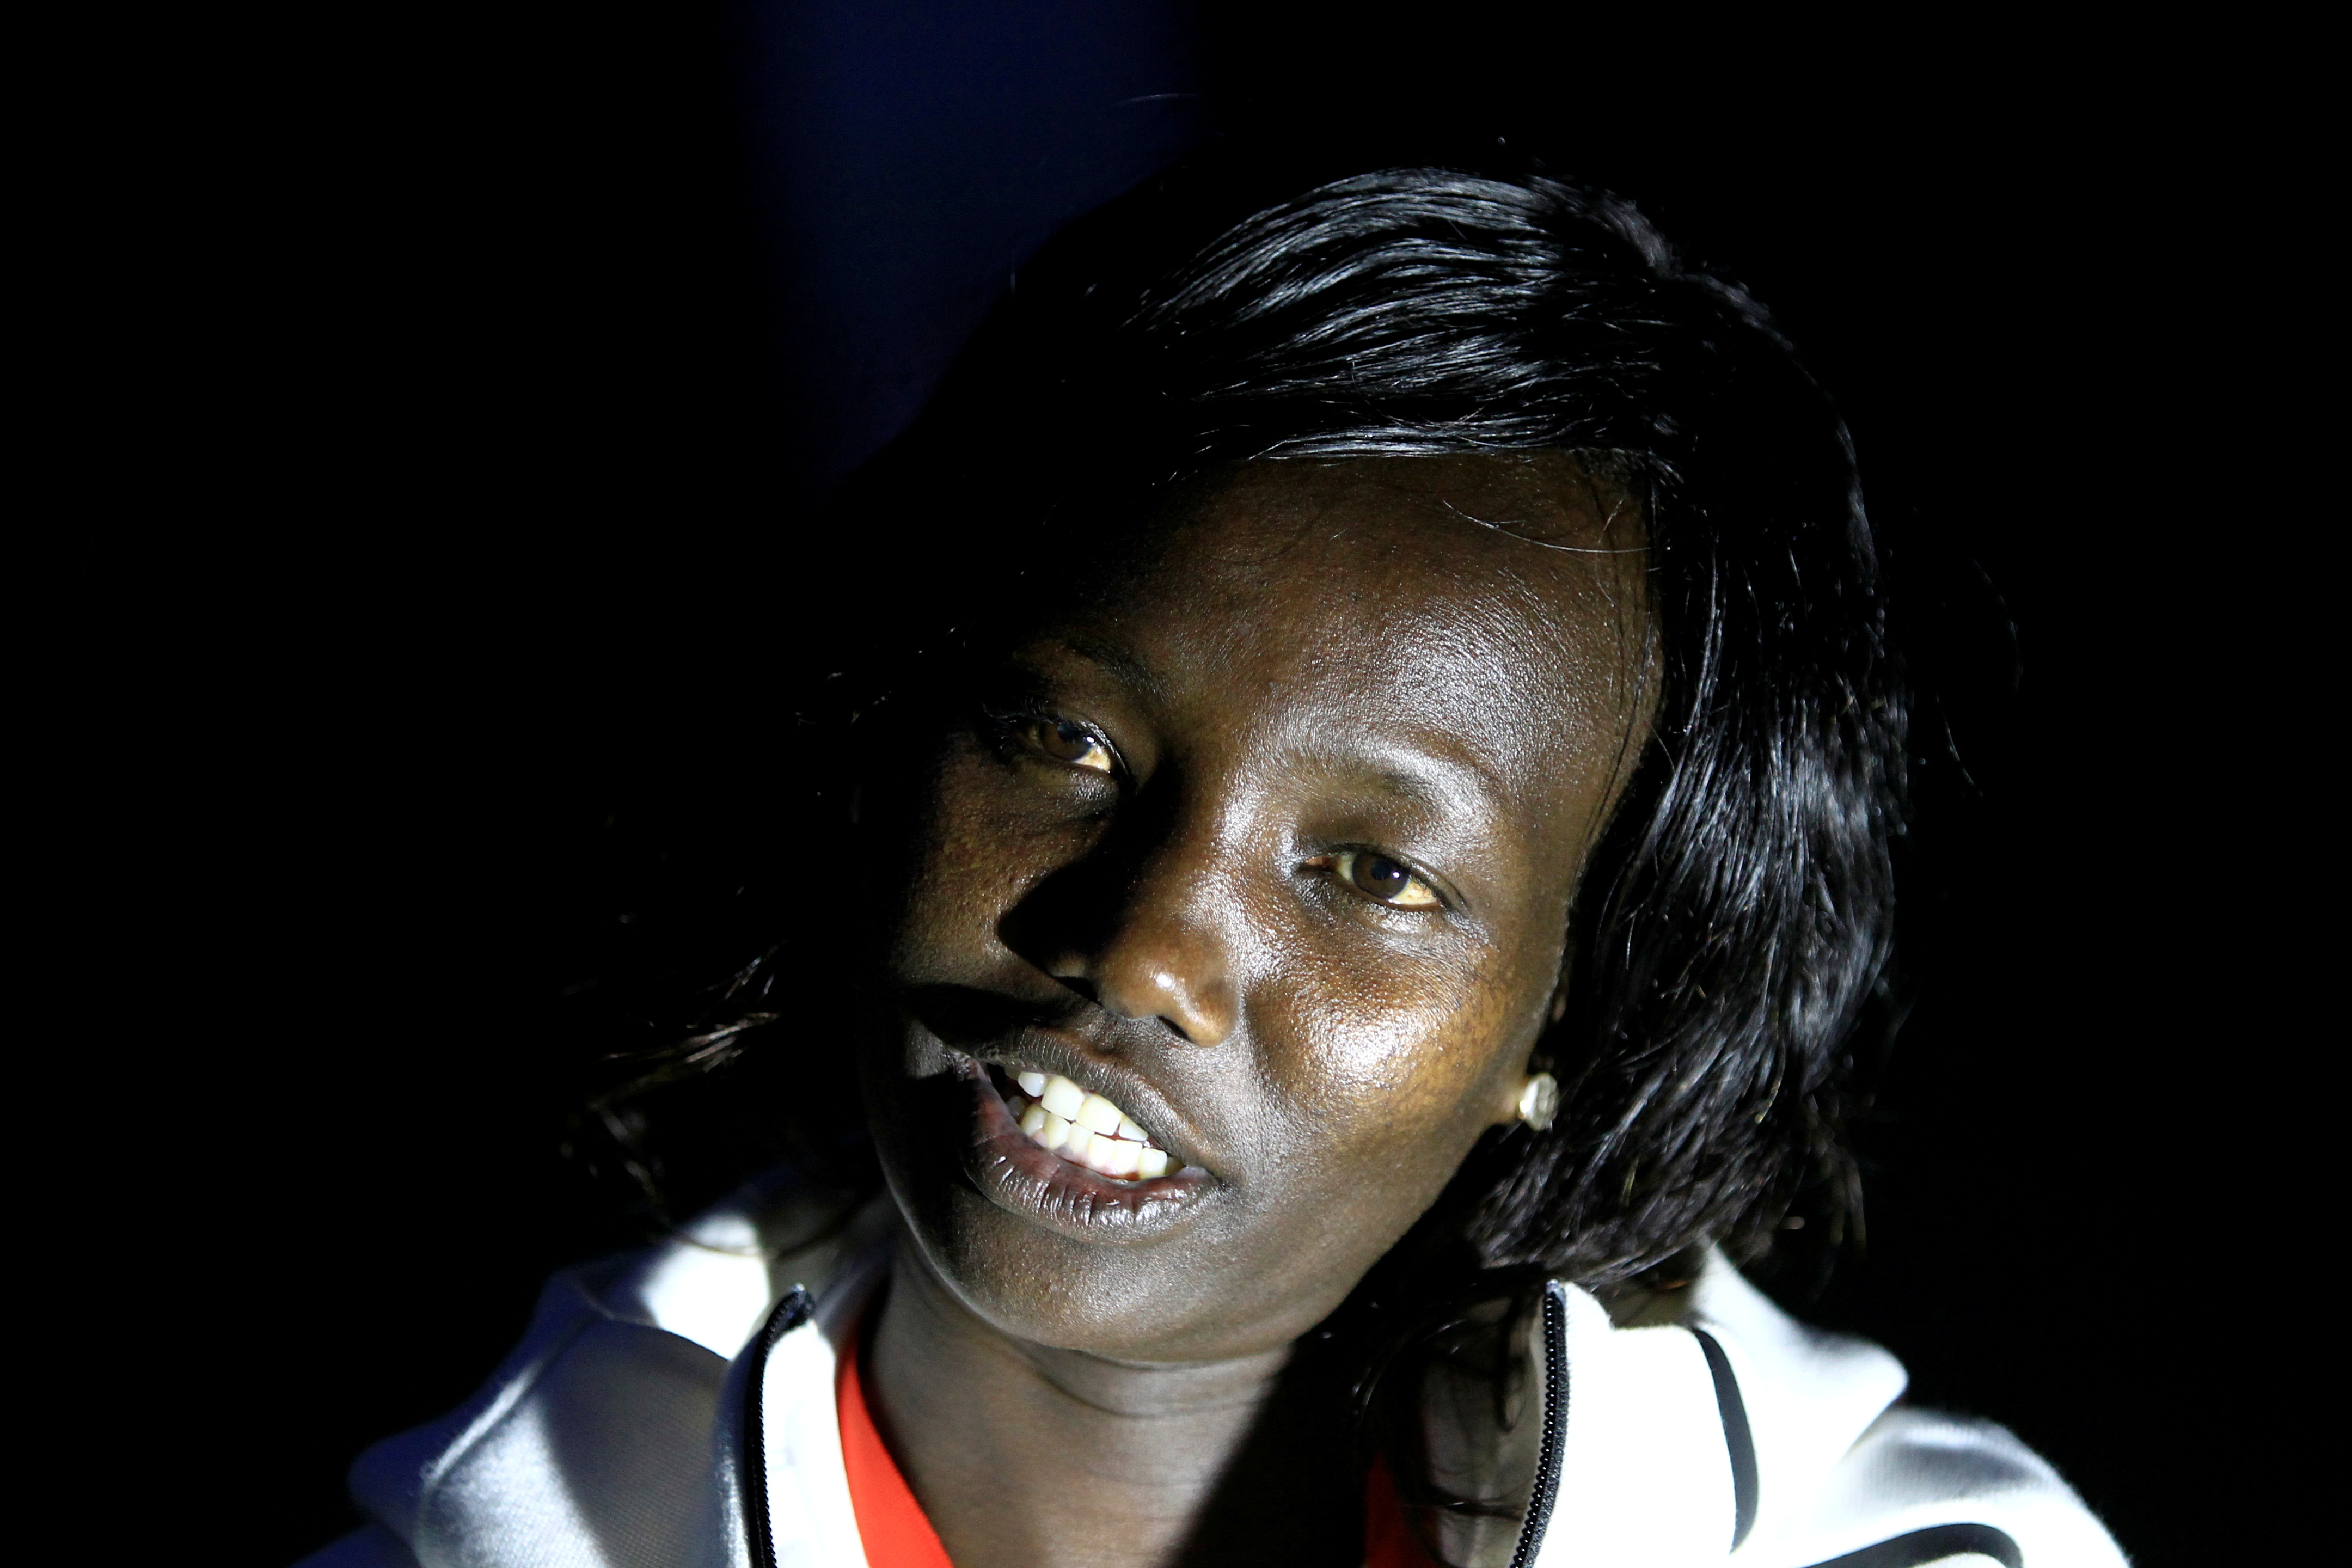 Mary Keitany, the world record holder in a women marathon, speaks during an interview with Reuters as she takes part in the 2019 Athletes Annual Conference in Eldoret